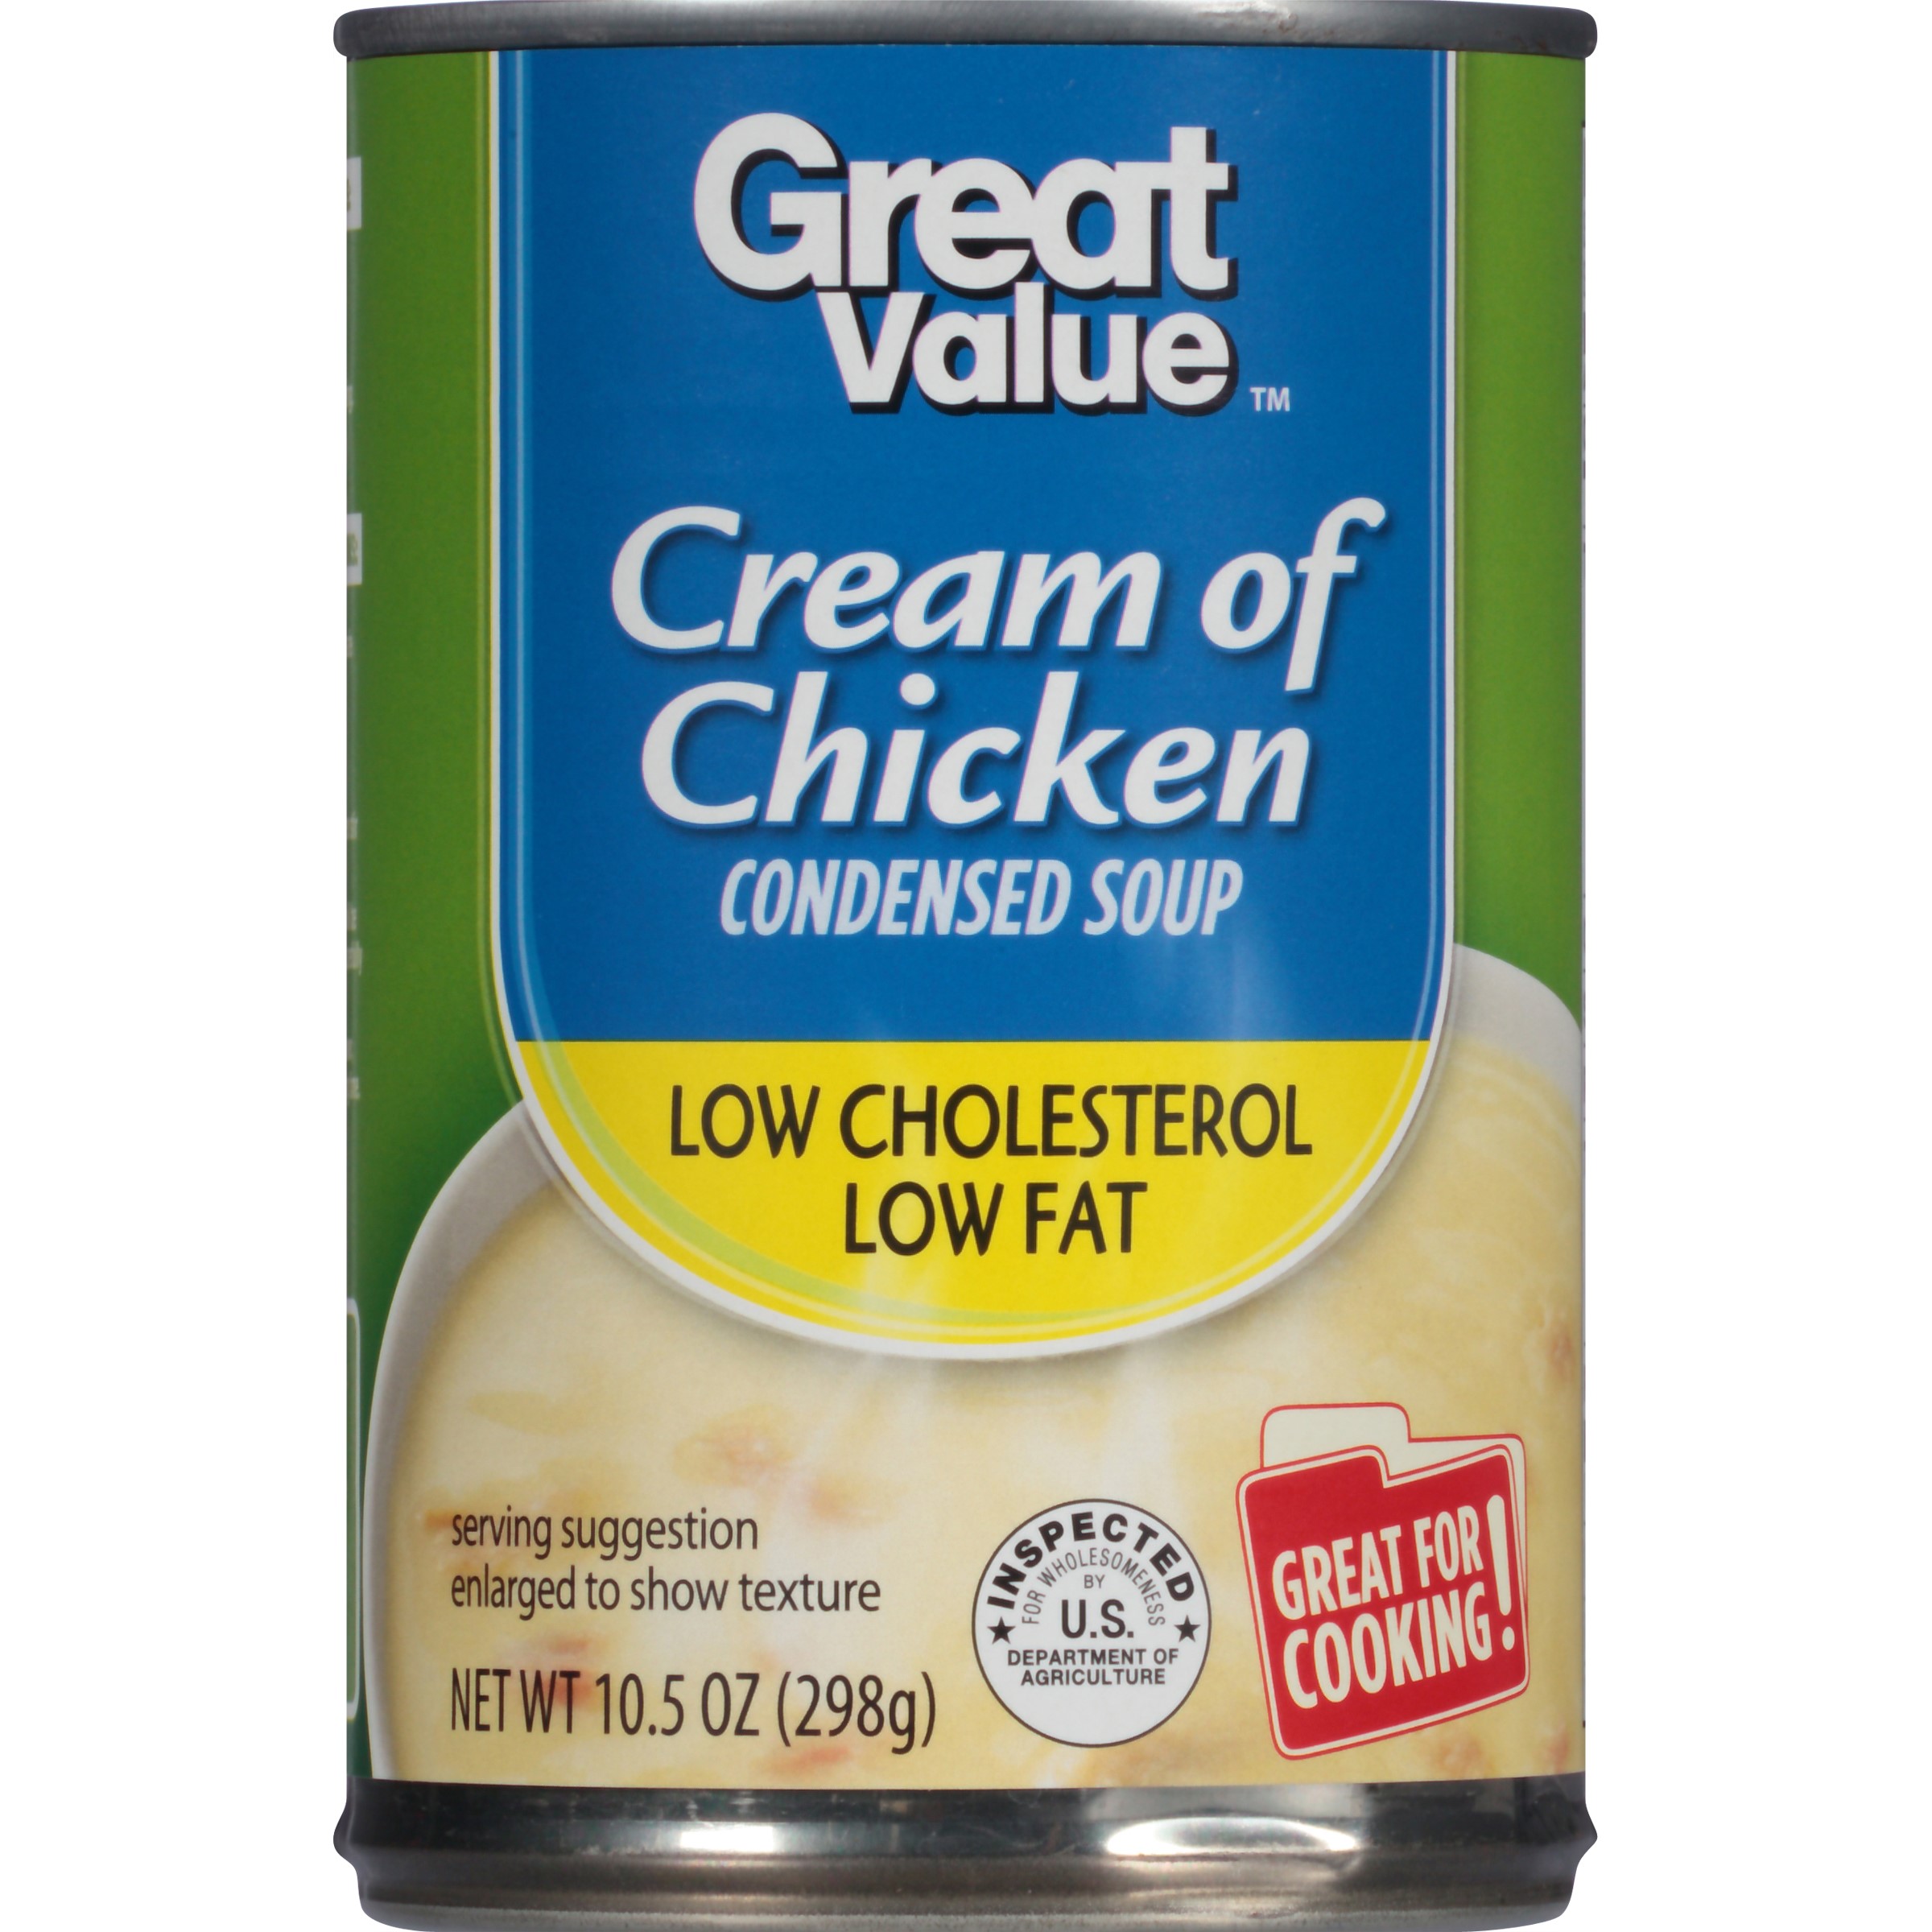 Great Value Hlthy-4-you Crm of Chkn Soup